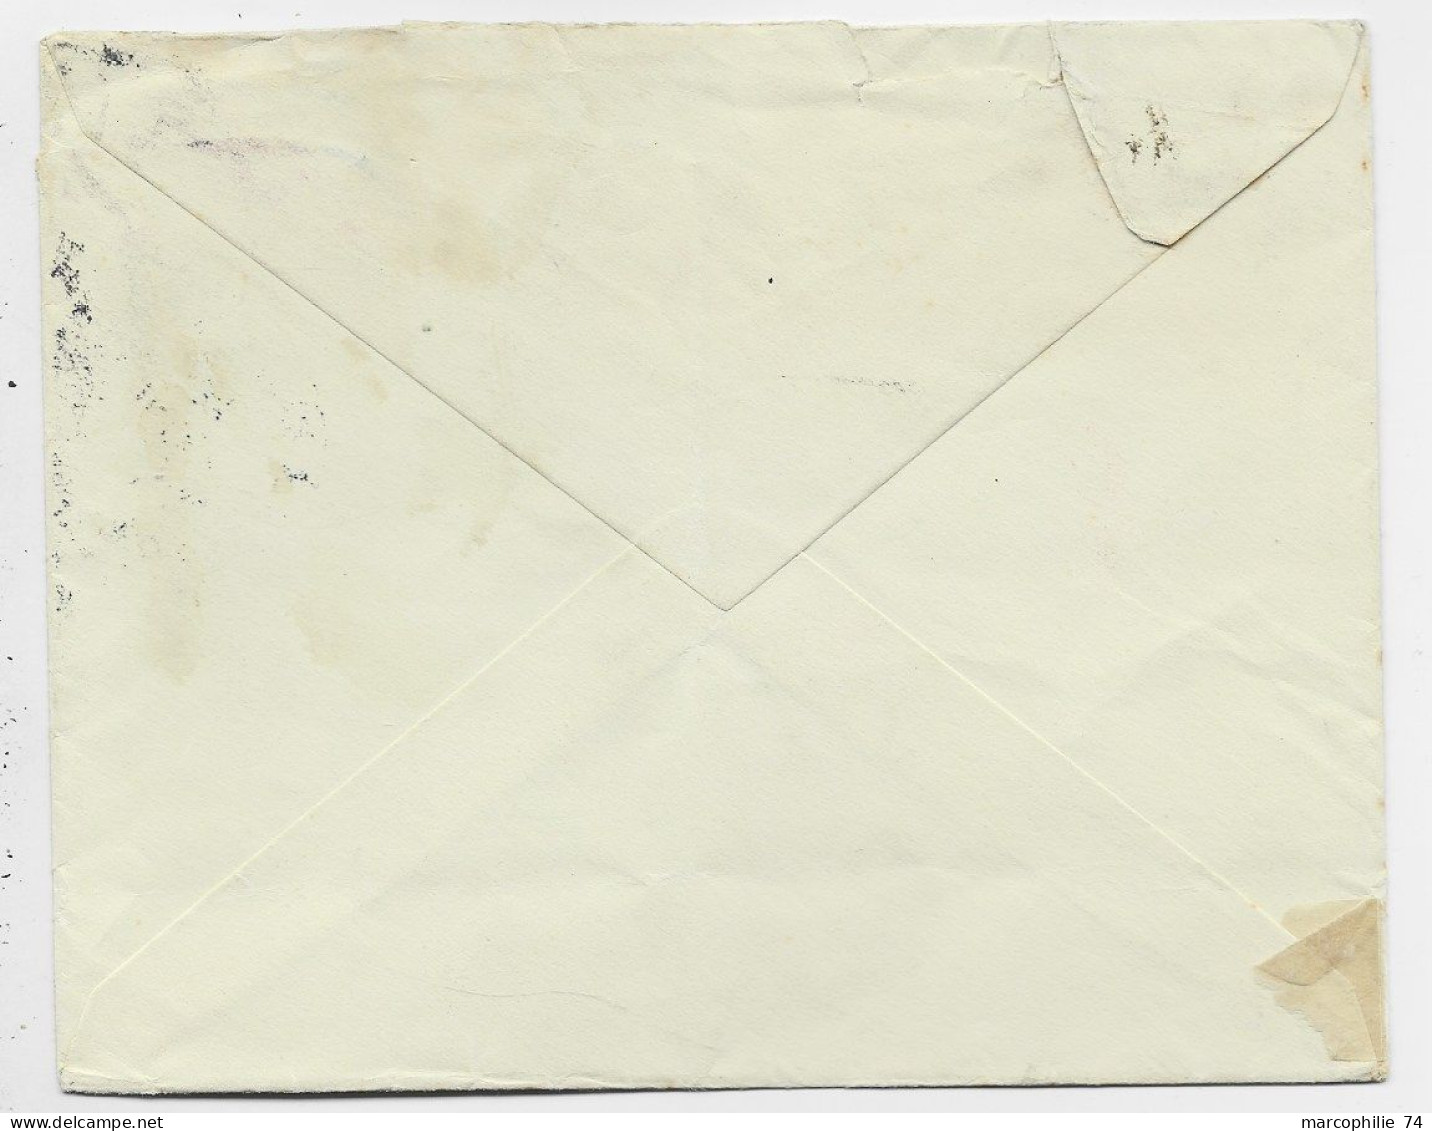 SUDAN AIR MAIL 2 1/2 SOLO LETTRE COVER AIR MAIL 1936  TO IRLAND REEX ENGLAND - Soedan (...-1951)